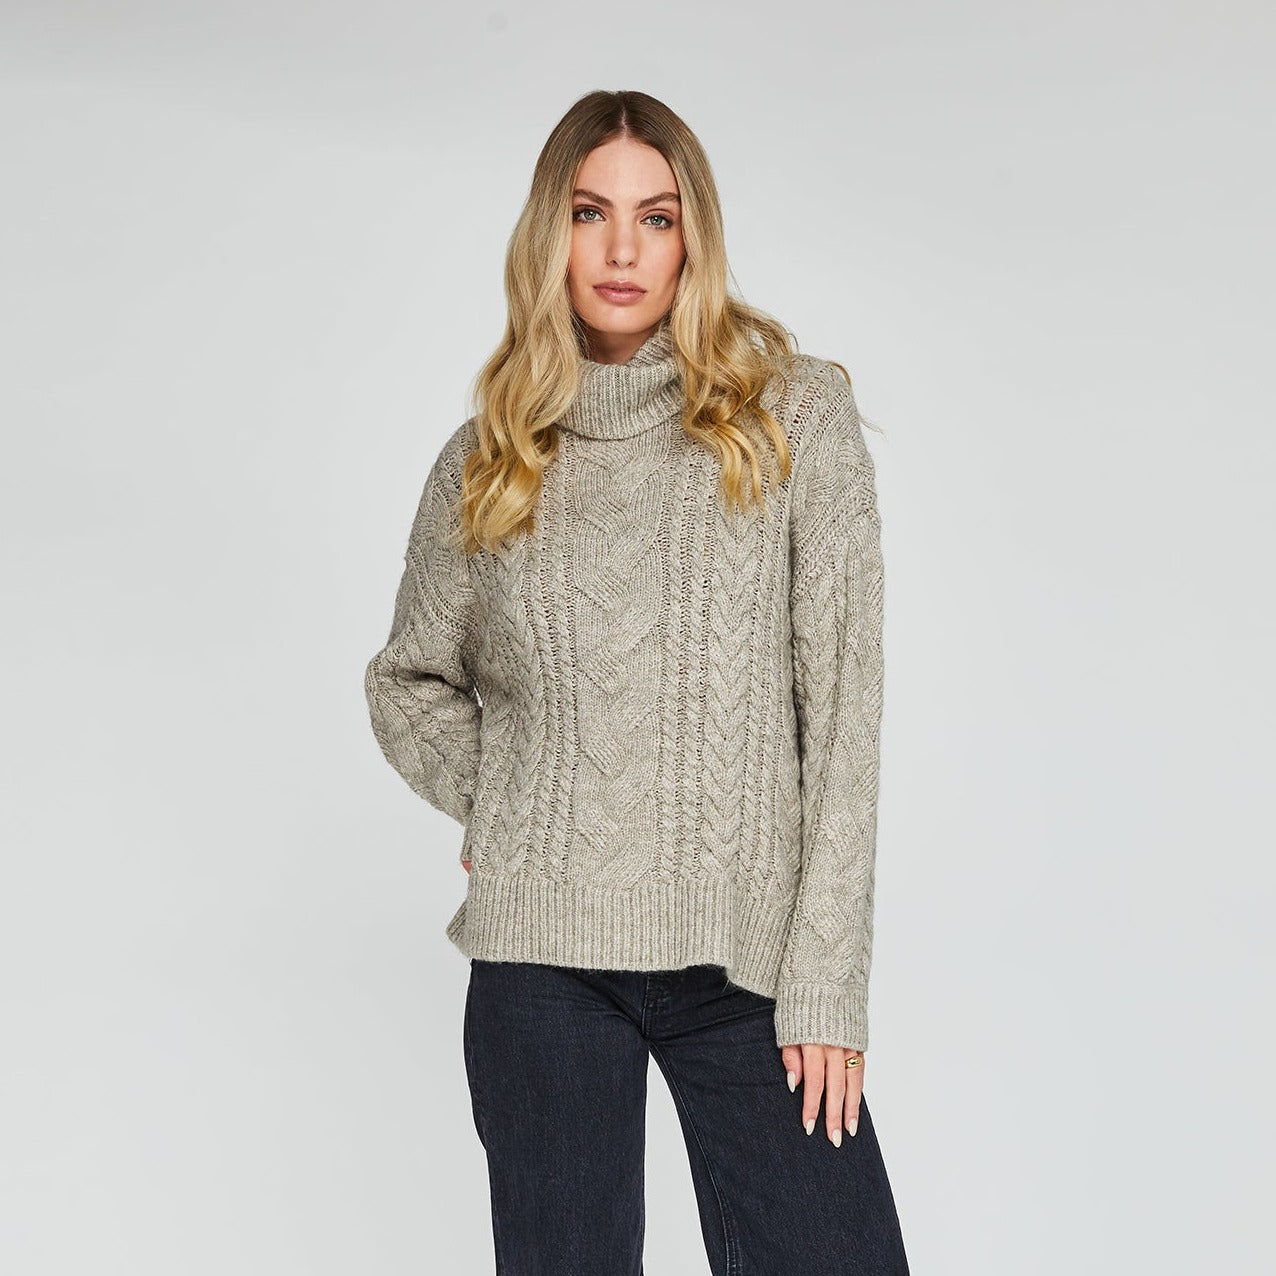 Marnie Pullover Sweater